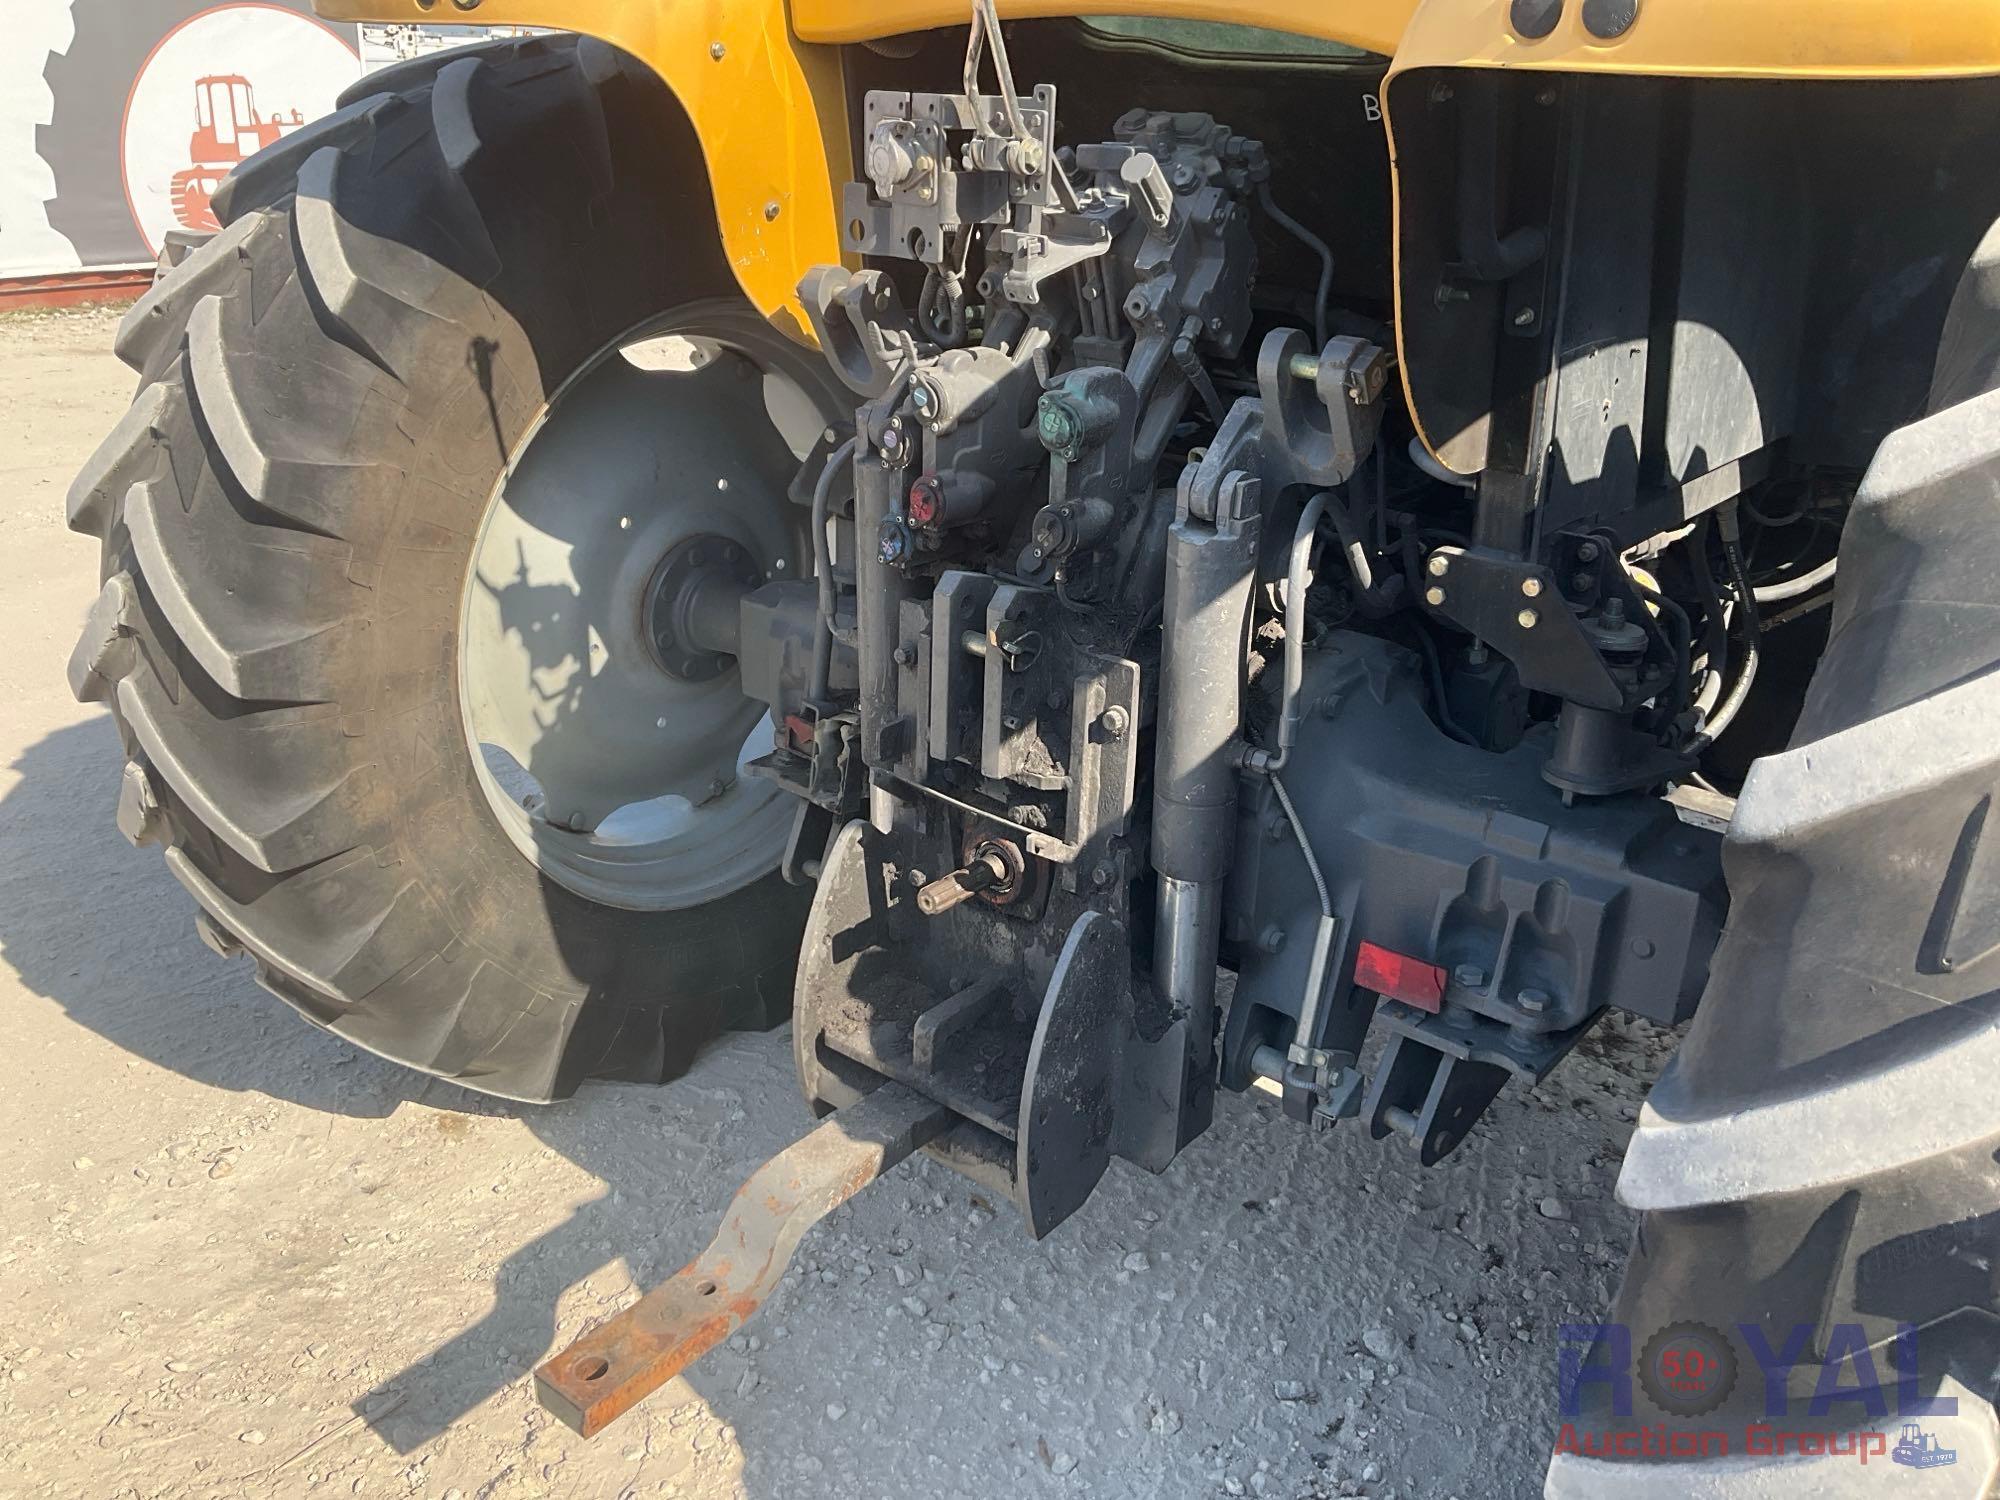 2018 Challenger MT525E 4WD Tractor